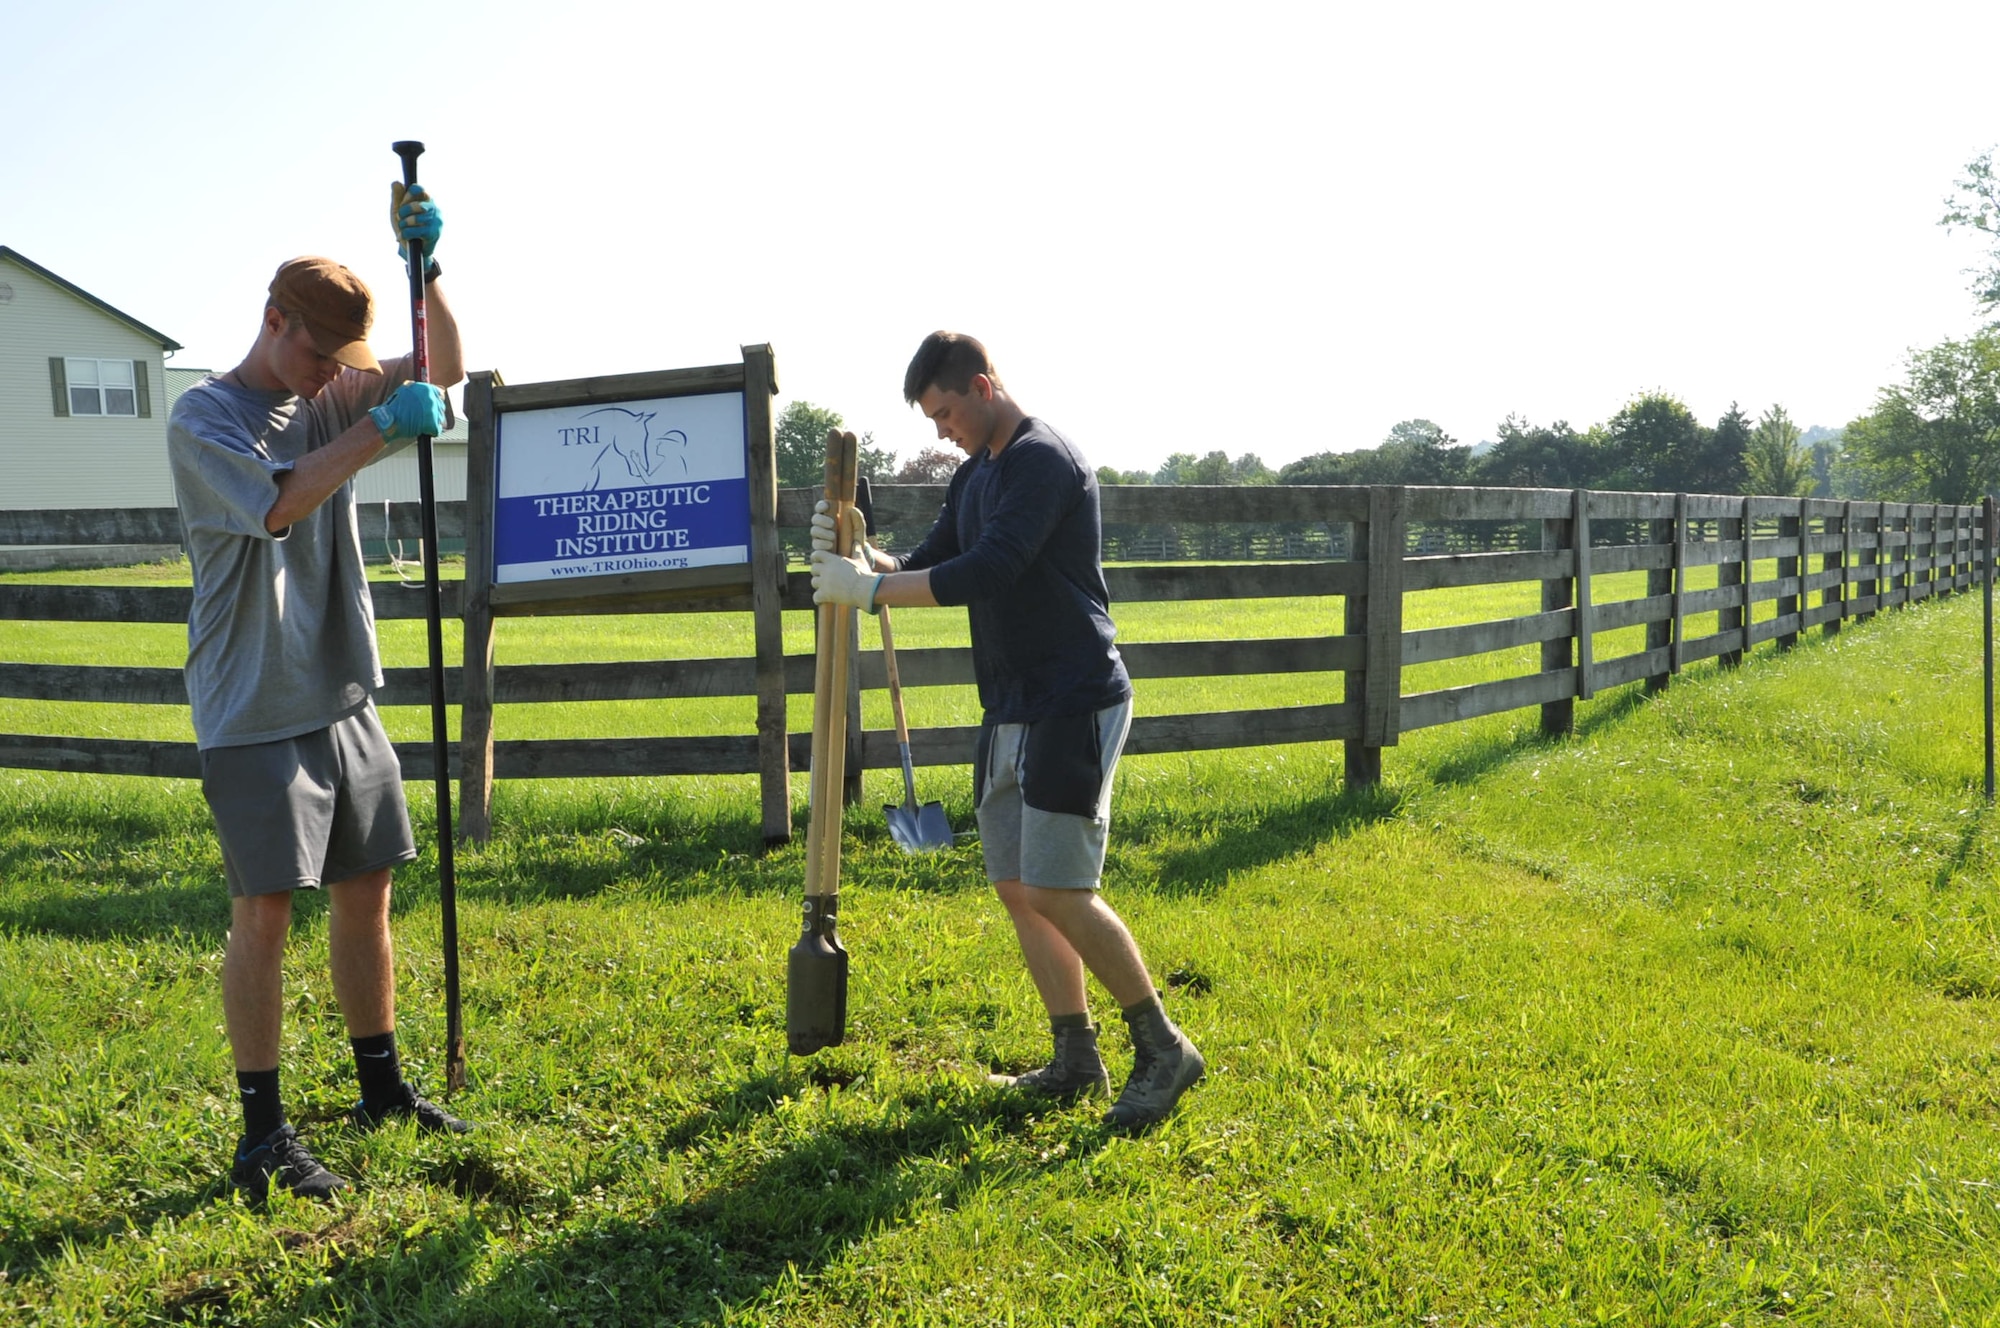 Air Force Academy Cadets Zack LaRocque, left, and Evan Place, right, dig post holes to place a sign at the Therapeutic Riding Institute. After a quality time with shovels, the duo were able to permanently place the Institute’s sign at the property’s entrance. LaRocque, Place and 18 fellow cadets travelled to Spring Valley, Ohio July 6, to volunteer with the institute ready its new location to begin operations. (U.S. Air Force photo/John Van Winkle)